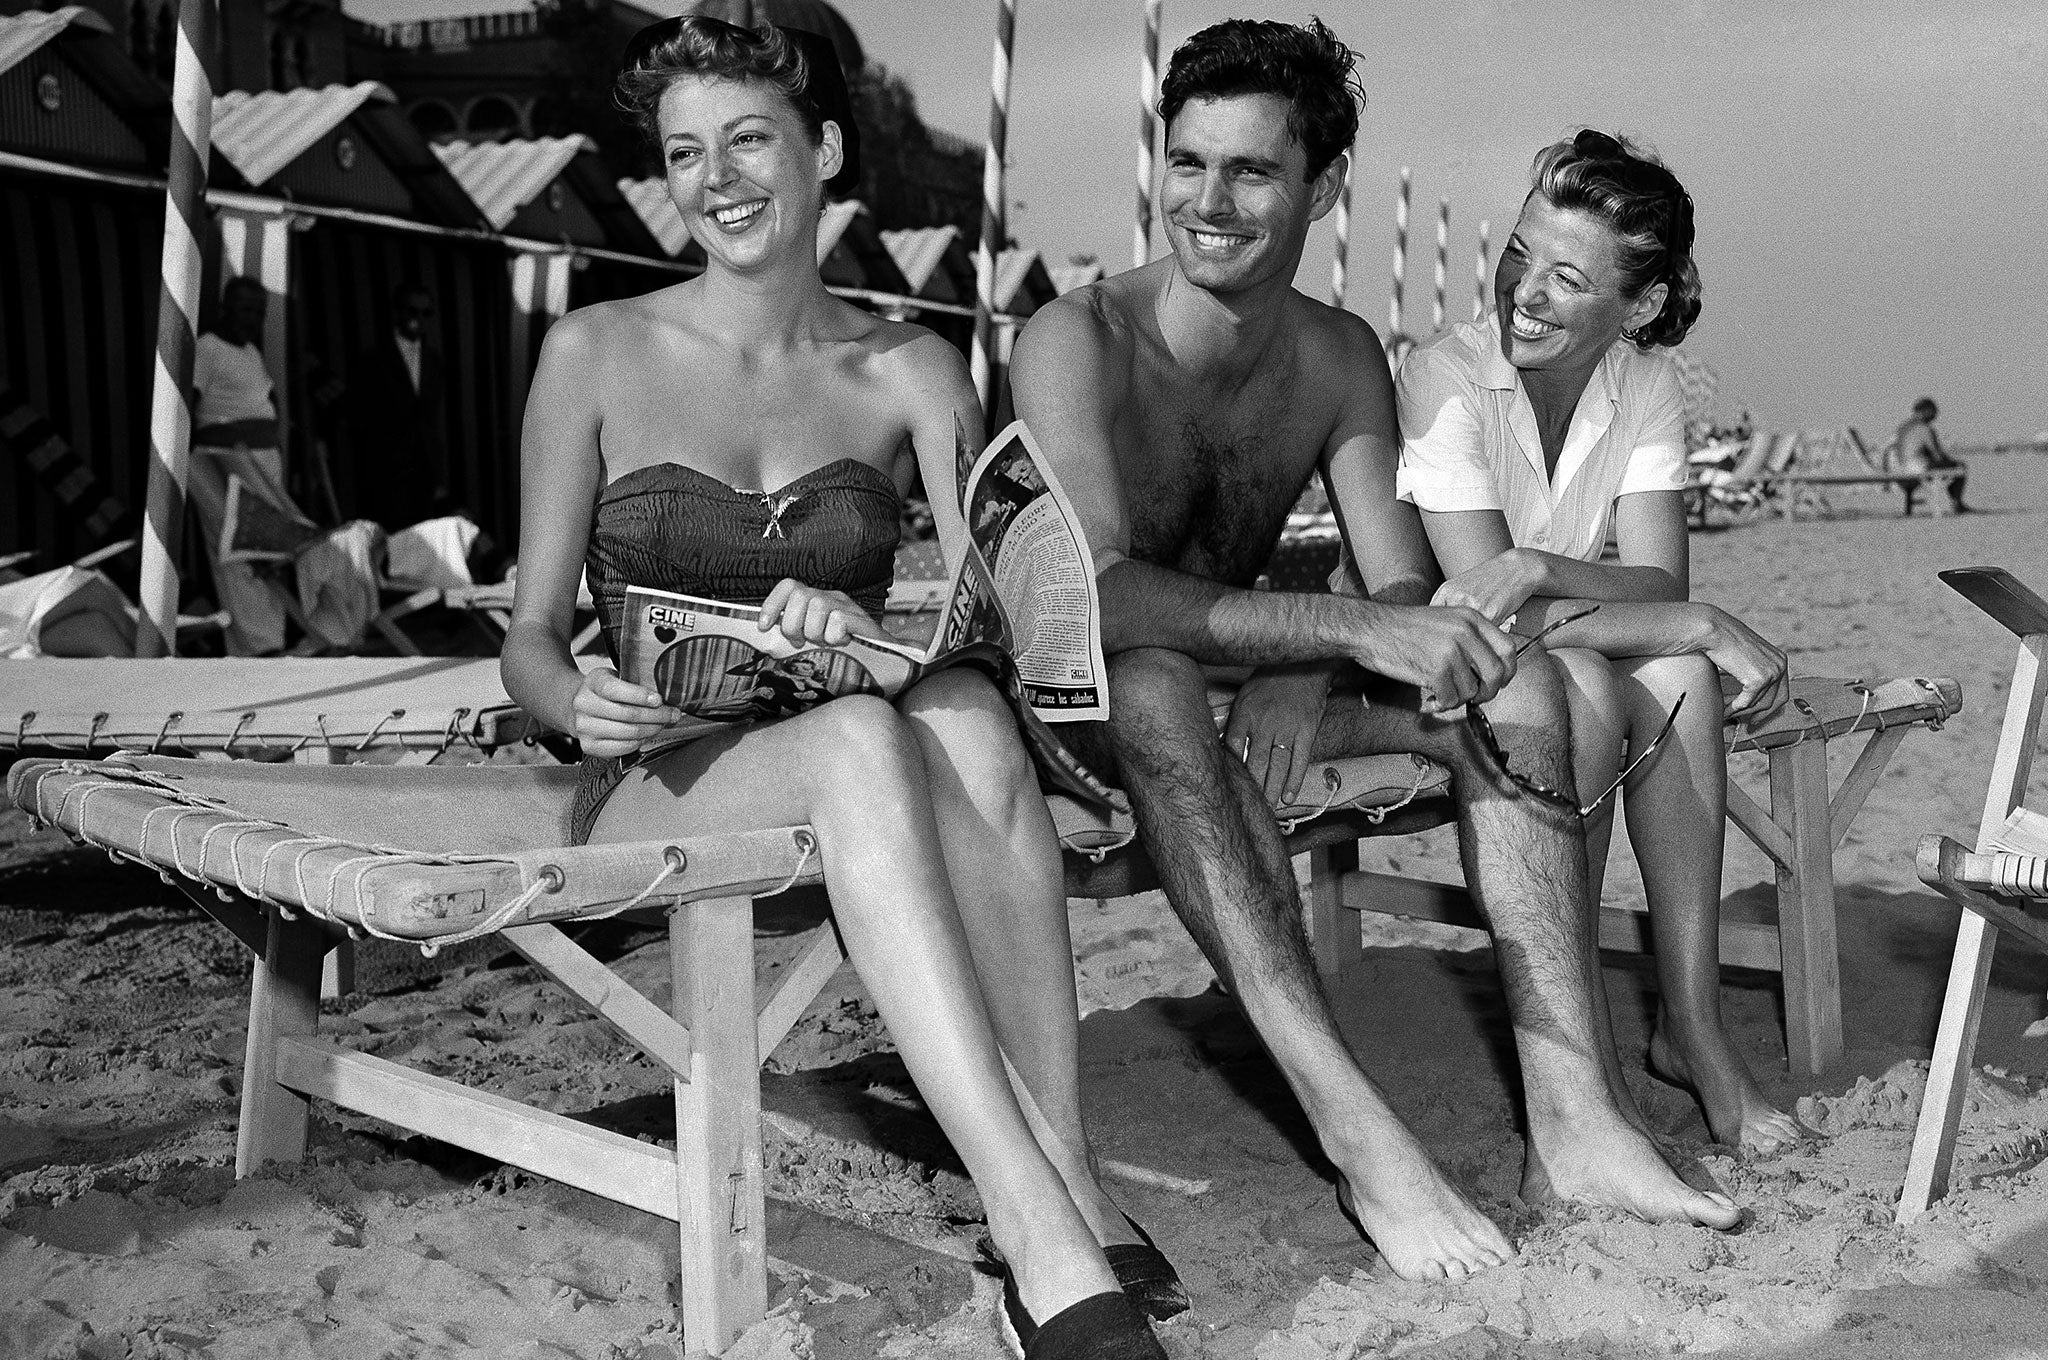 Louis Jourdan with actress Anne Vernon, left, and his wife Berthe Fredrique on the beach at Lido isle in Venice, Italy